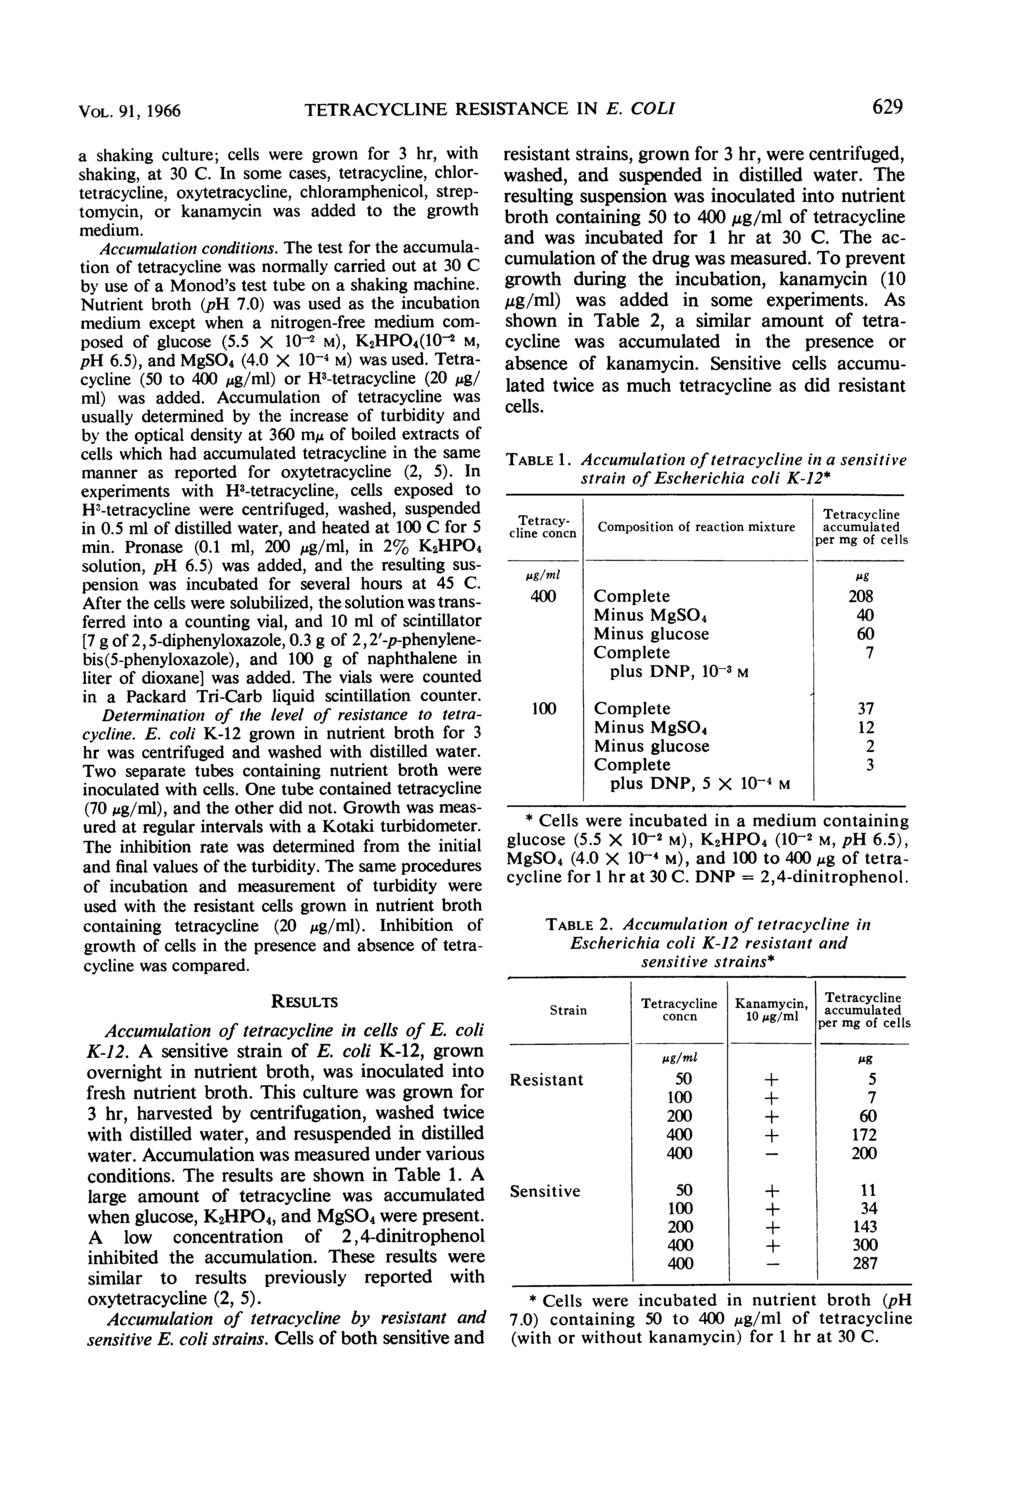 VOL. 91, 1966 TETRACYCLINE RESISTANCE IN E. COLI a shaking culture; cells were grown for 3 hr, with shaking, at 30 C.